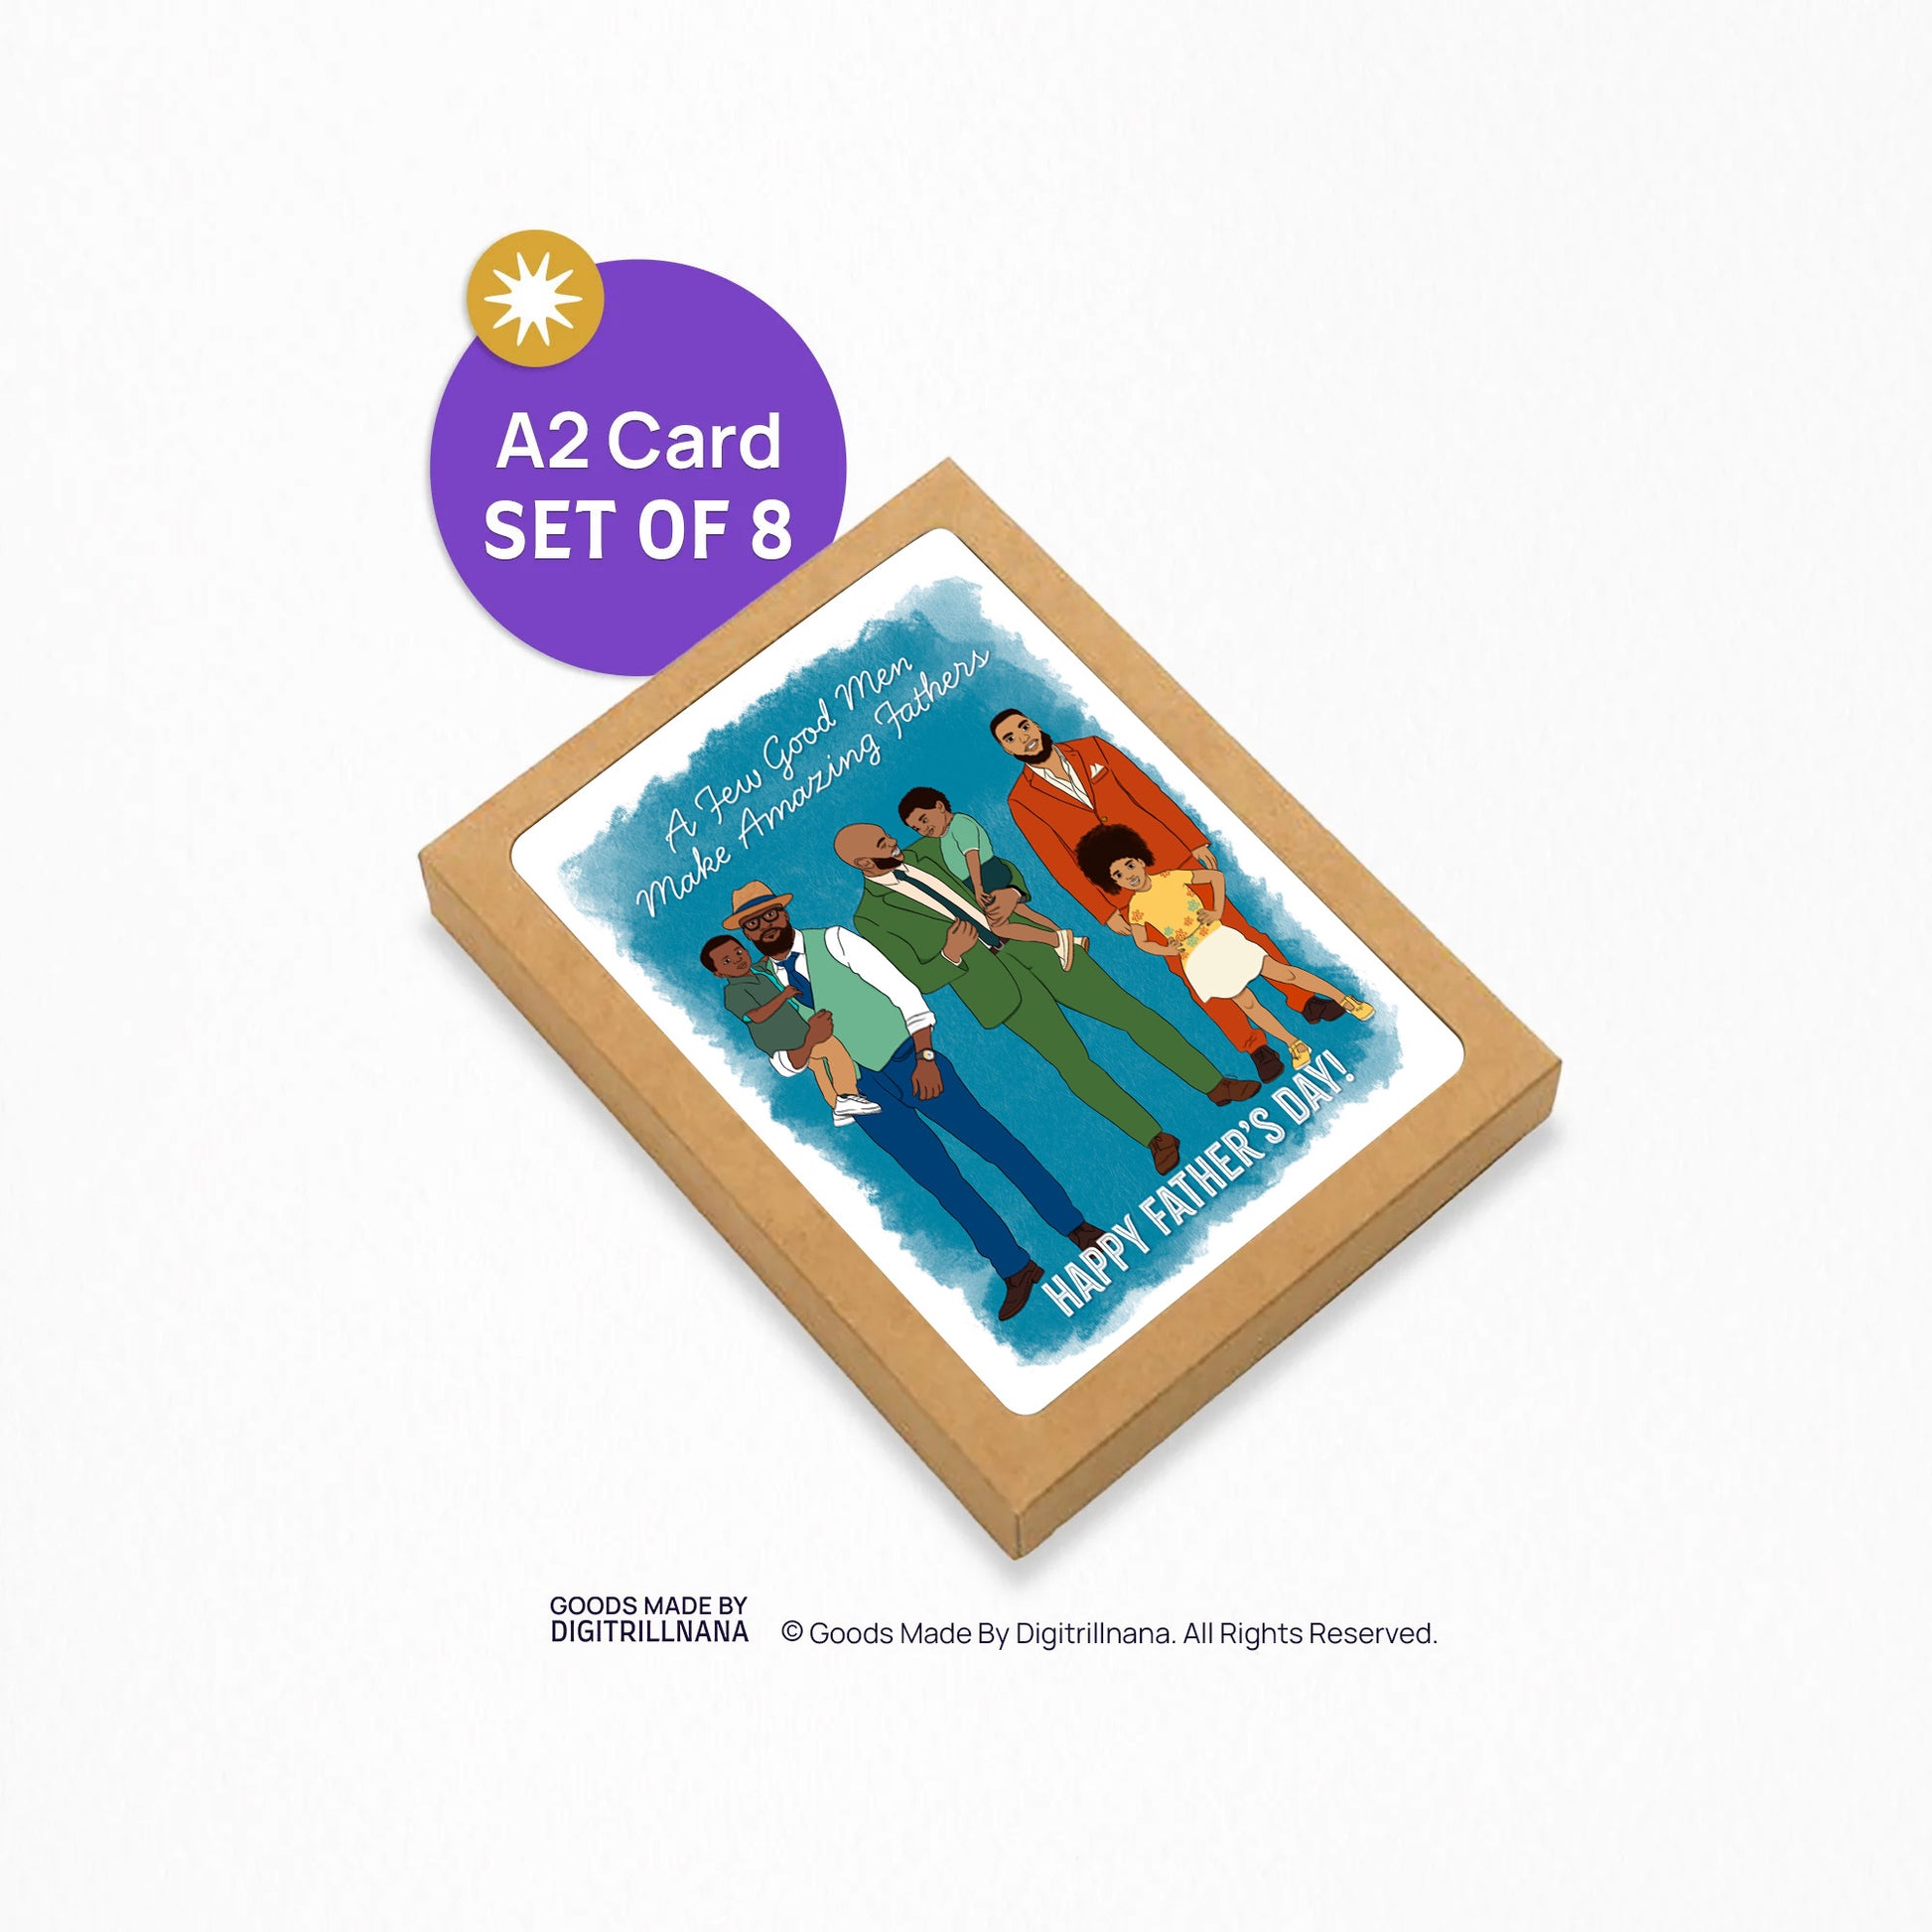 Buy Dads Club 4.25x5.5” A2 Father's Day Dad greeting card. Black African American Fathers Card. Colorful Eco-friendly Card for Dad from Goods Made By Digitrillnana, Ashley Fletcher. Black Woman Owned. Gifts celebrating Black, African-American culture. Perfect Dad to Dad Father's day gift!